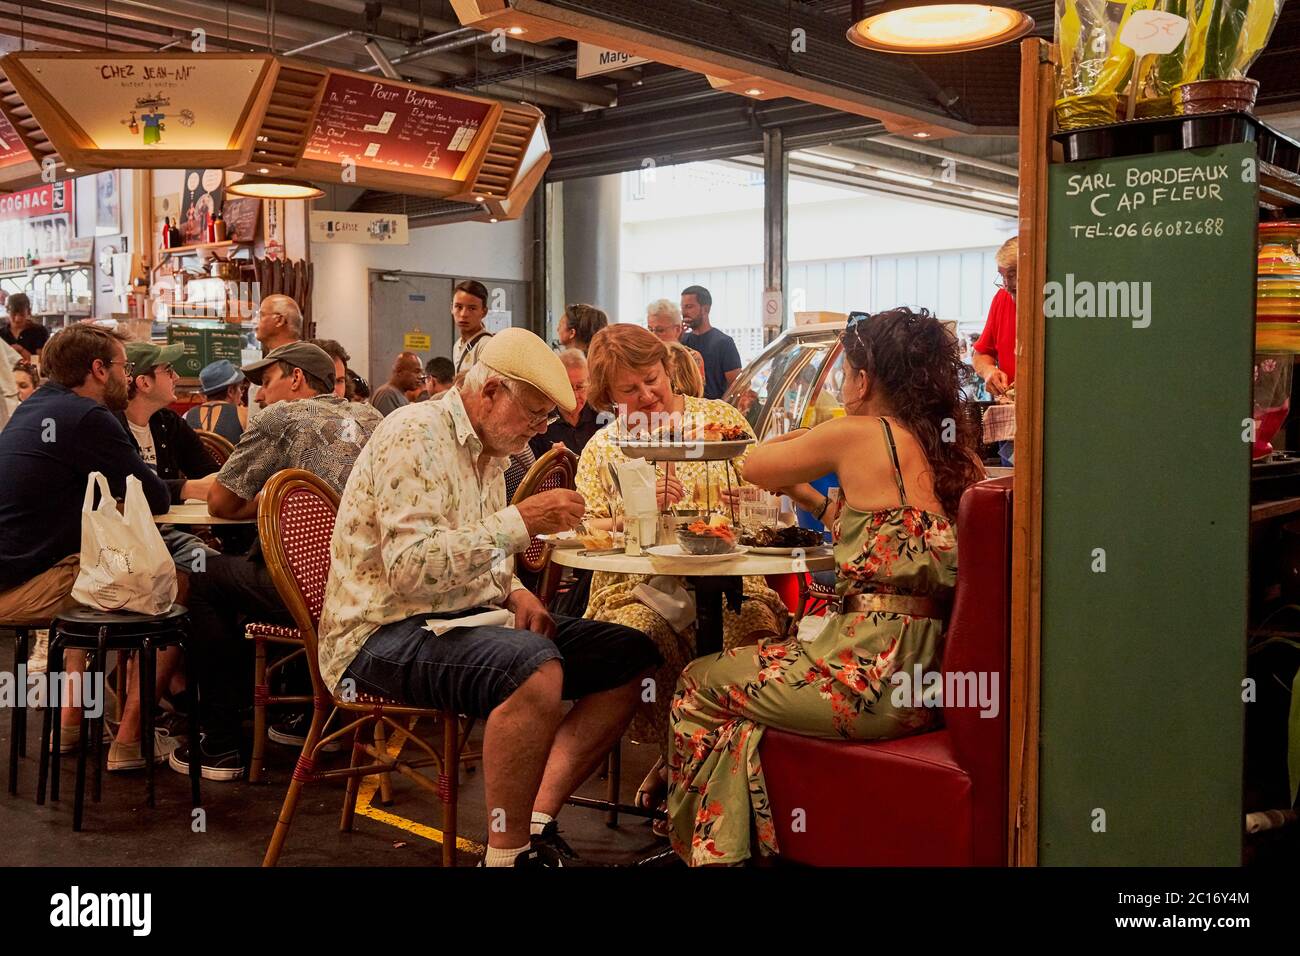 Groups of people sit at tables enjoying shellfish and seafood platters at chez  jean mi Capuchin Market (Marche des capucins) Bordeaux France Stock Photo -  Alamy